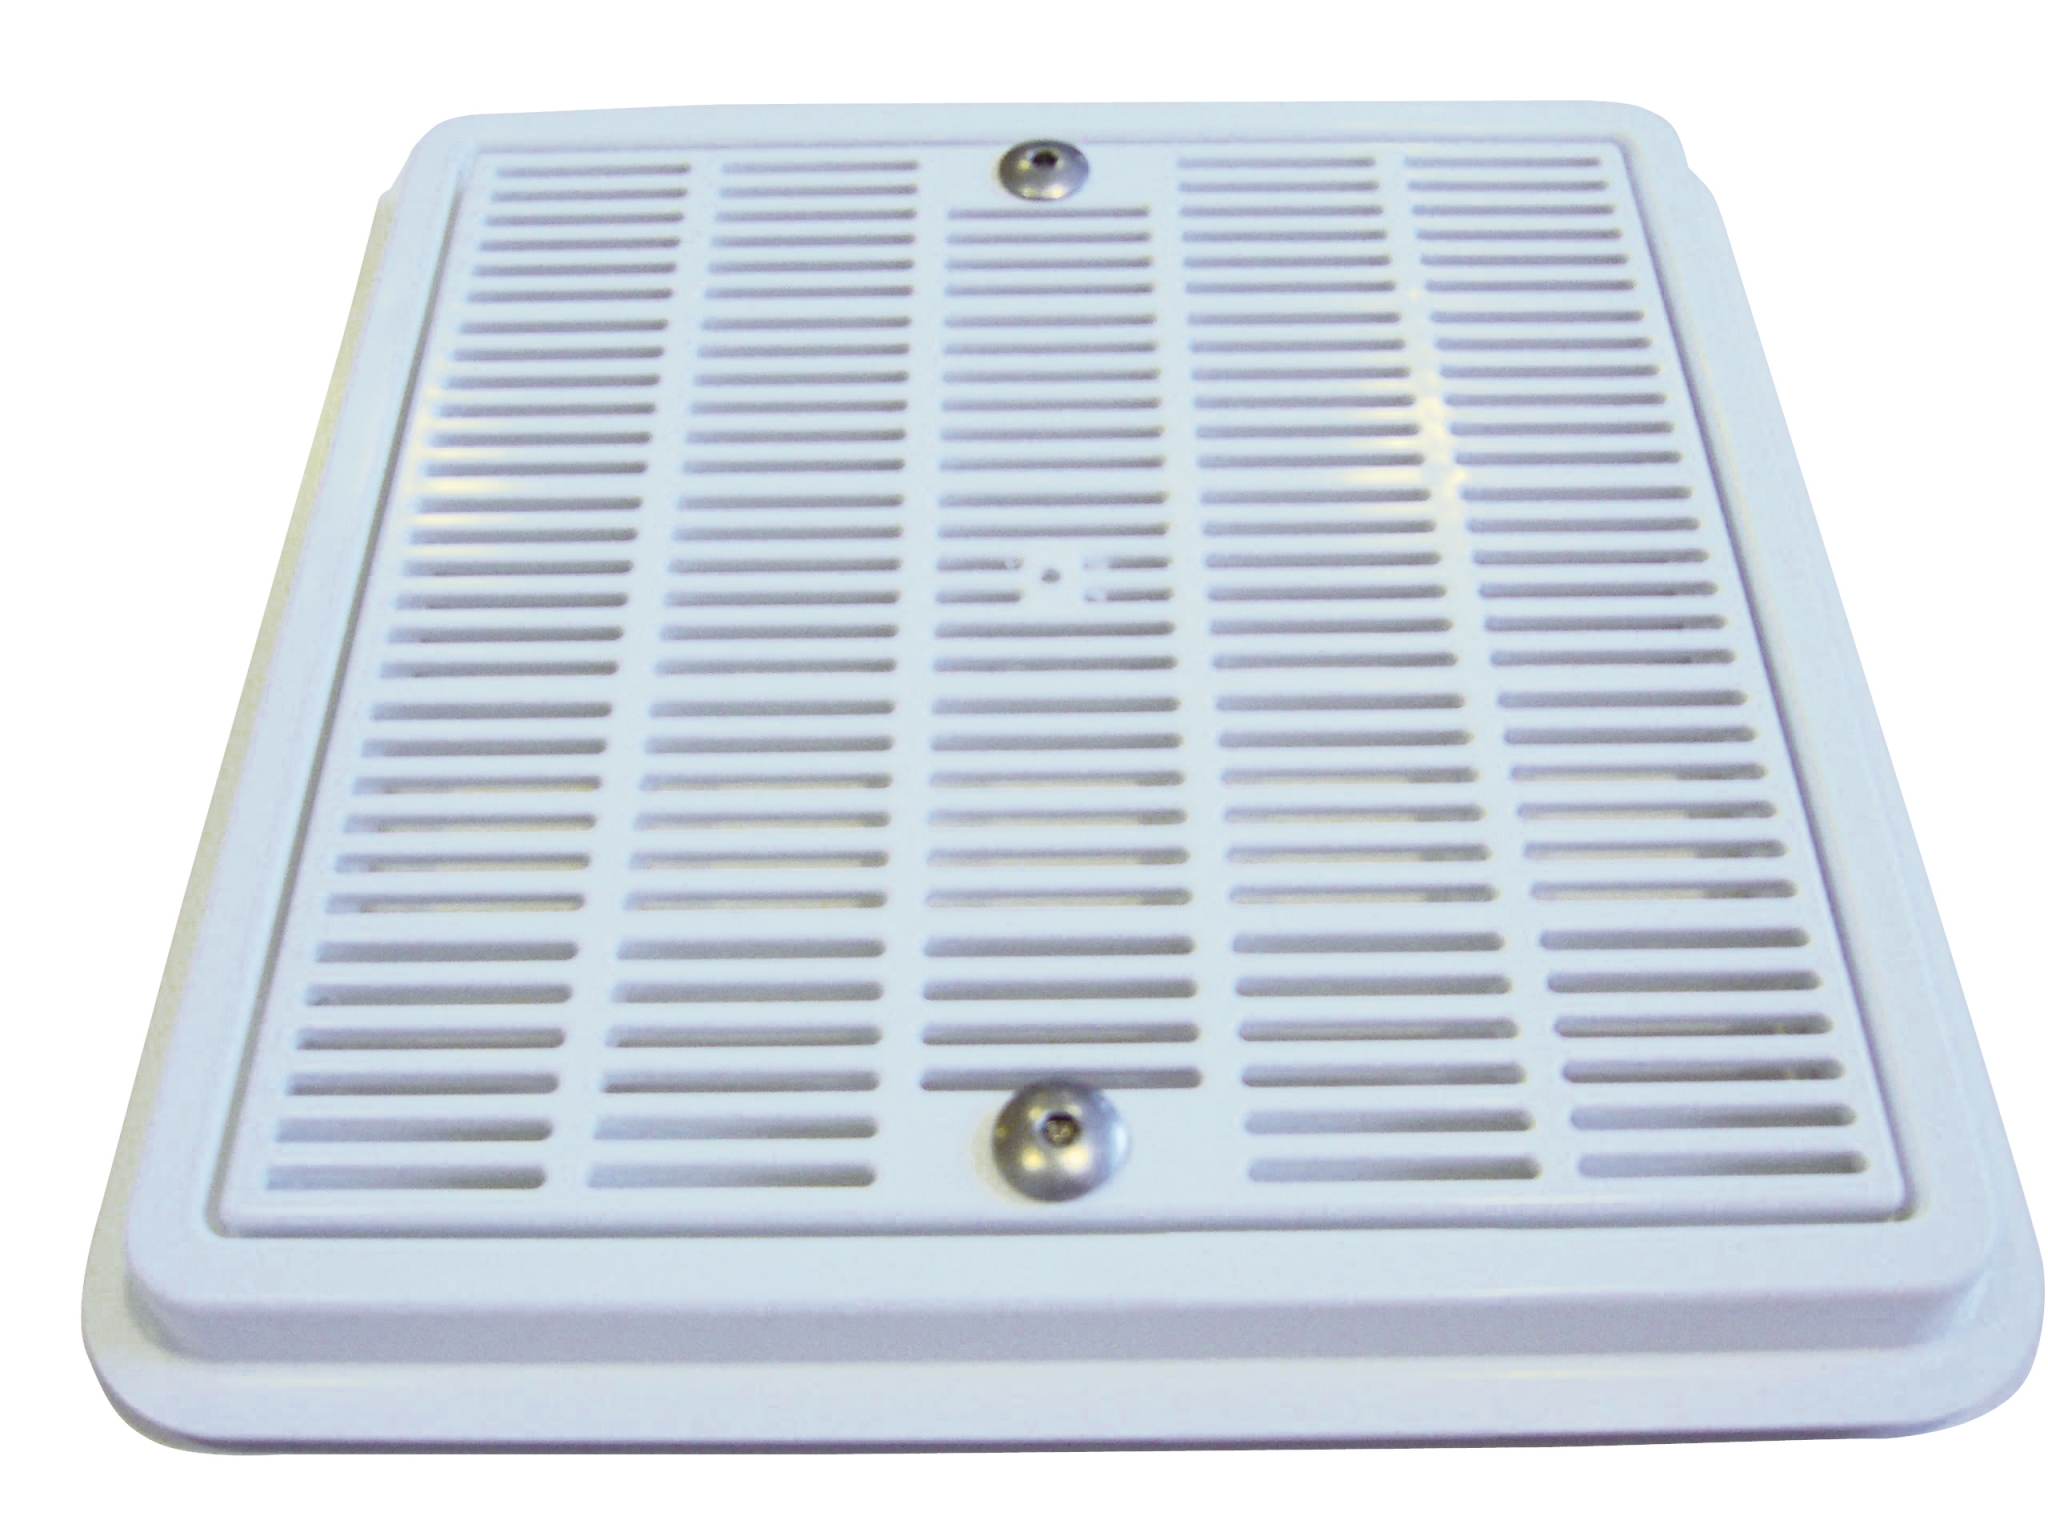  Drain grille (ABS)